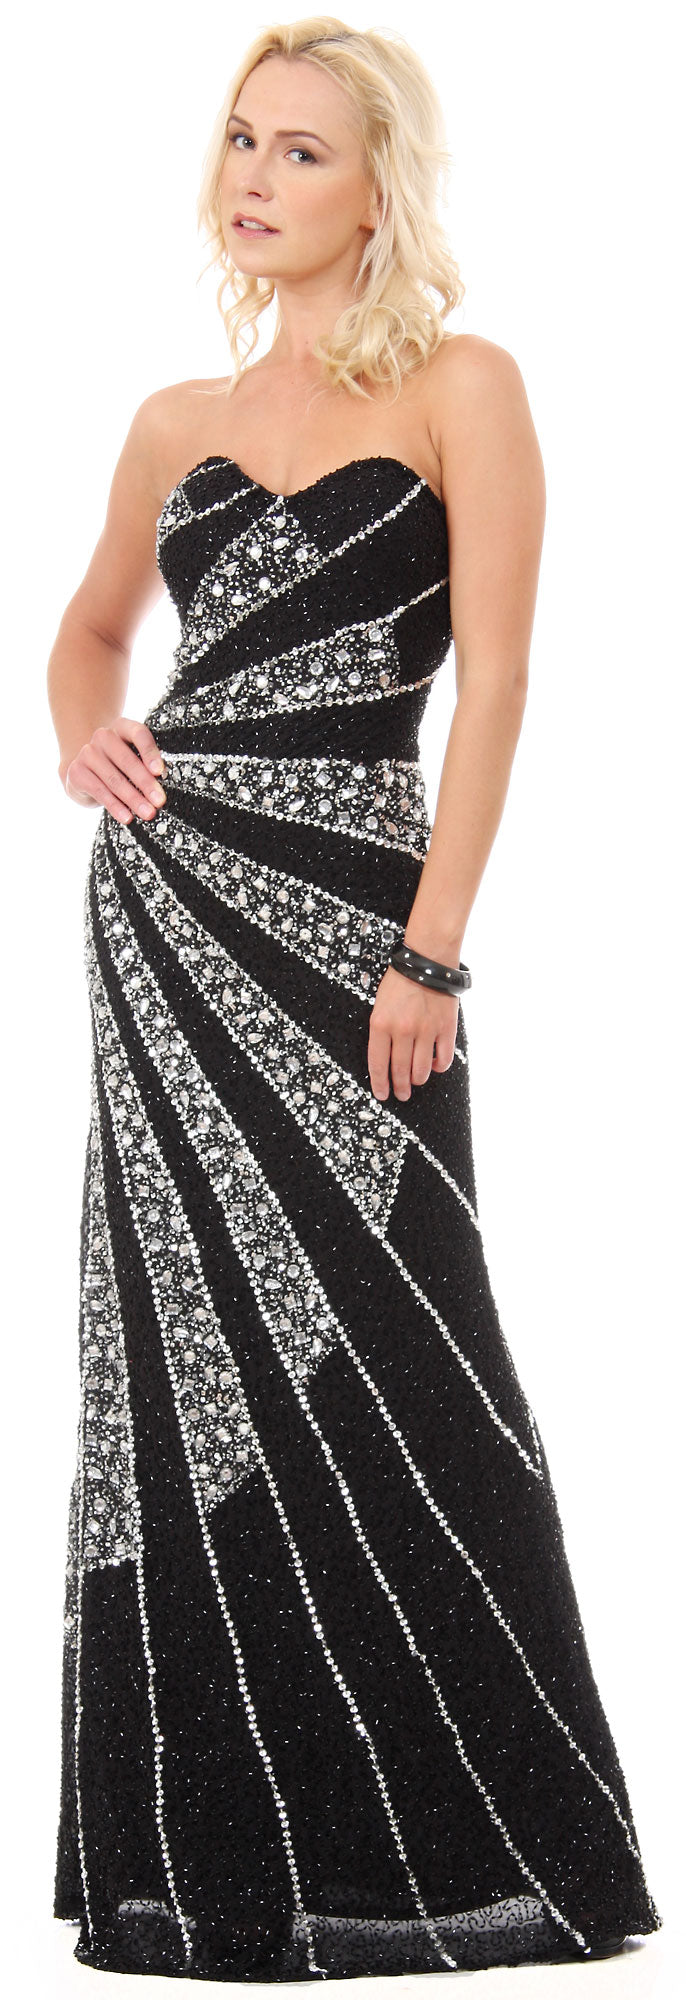 Main image of Strapless Sequins & Rhinestones Long Formal Prom Dress